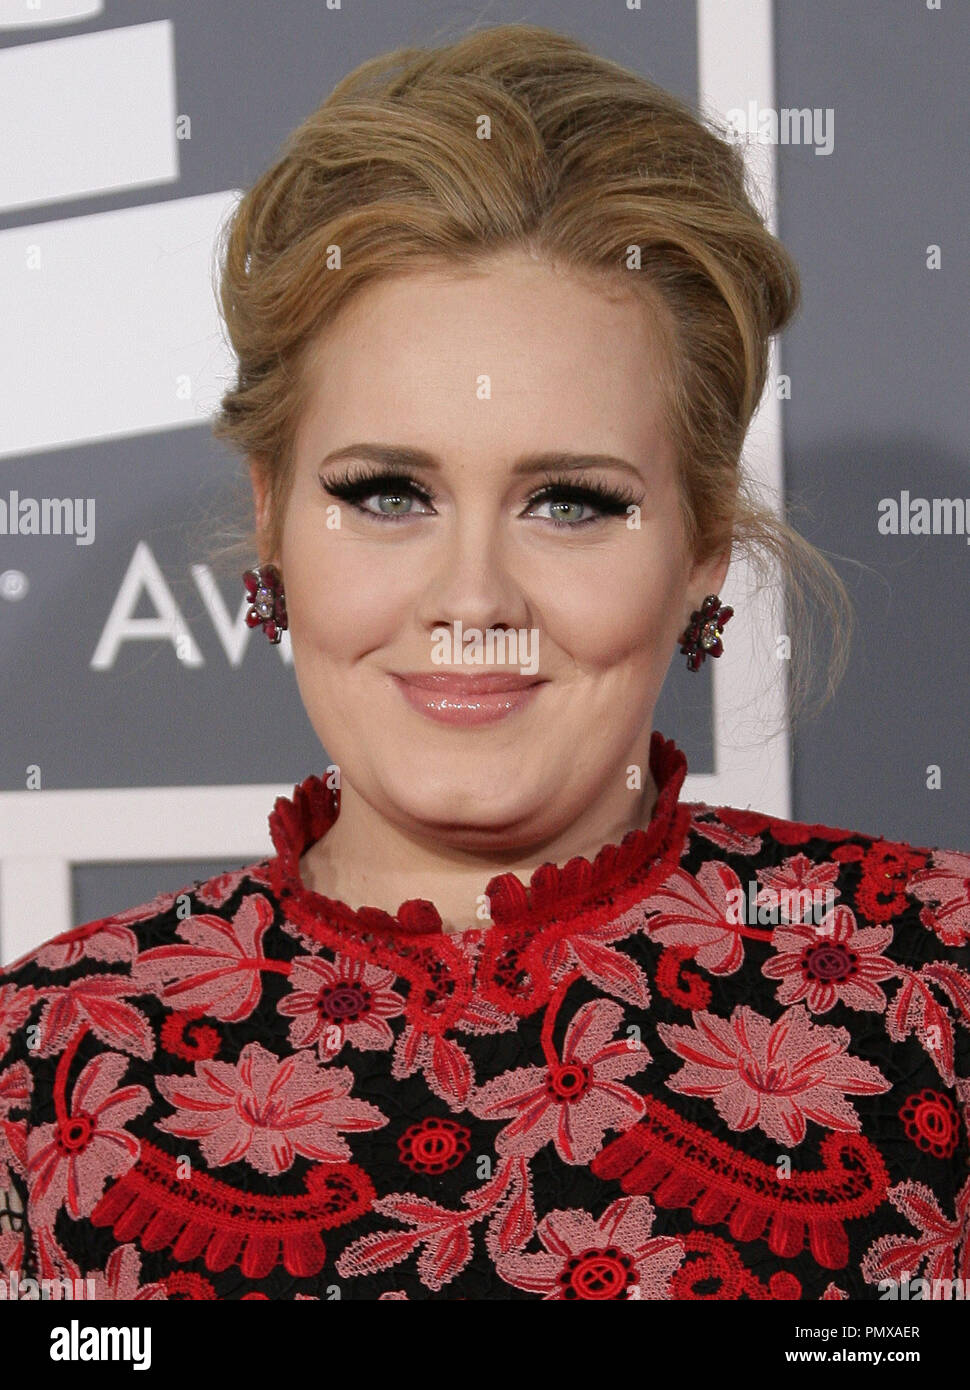 Adele at the 55th Annual Grammy Awards held at the Staples Center in Los Angeles, CA.The event took place on Sunday, February 10, 2013. Photo by PRPP / PictureLux  File Reference # 31836 005PRPP  For Editorial Use Only -  All Rights Reserved Stock Photo